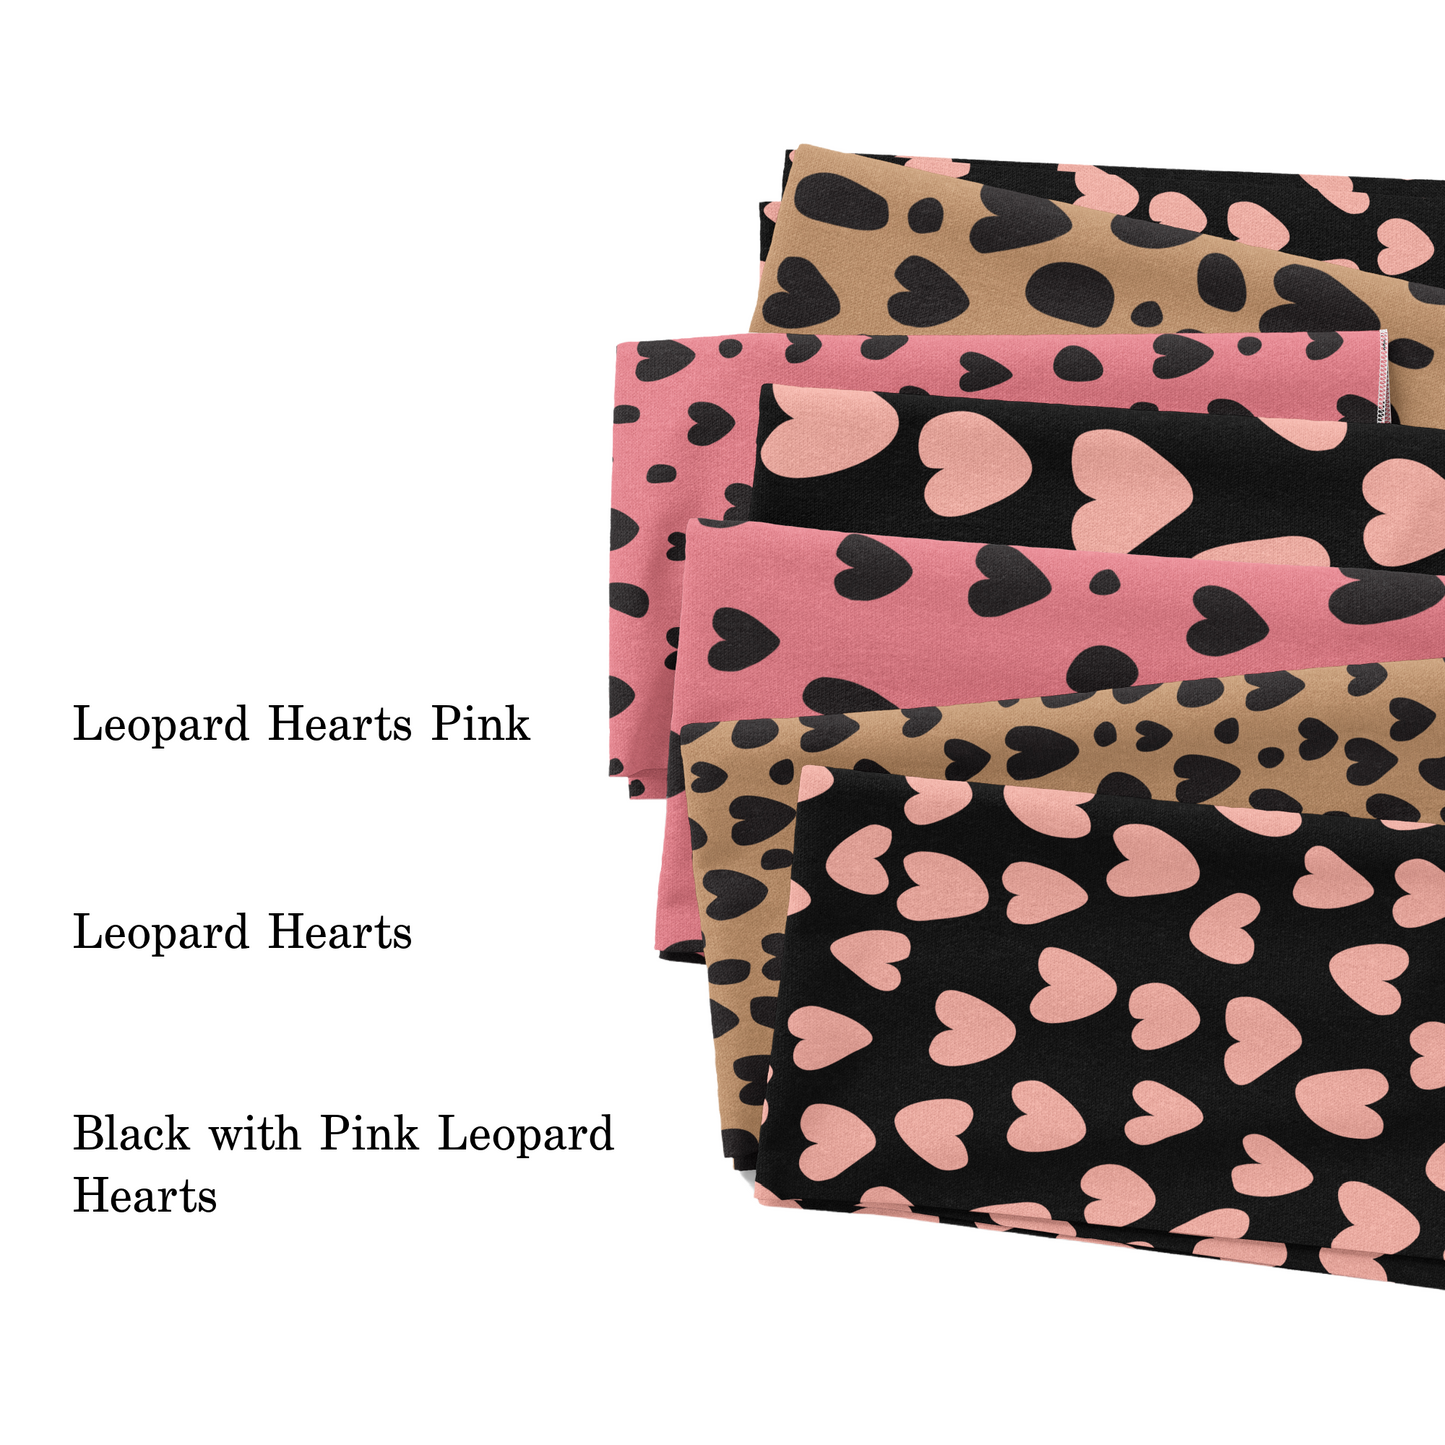 Black With Pink Leopard Hearts Fabric By The Yard